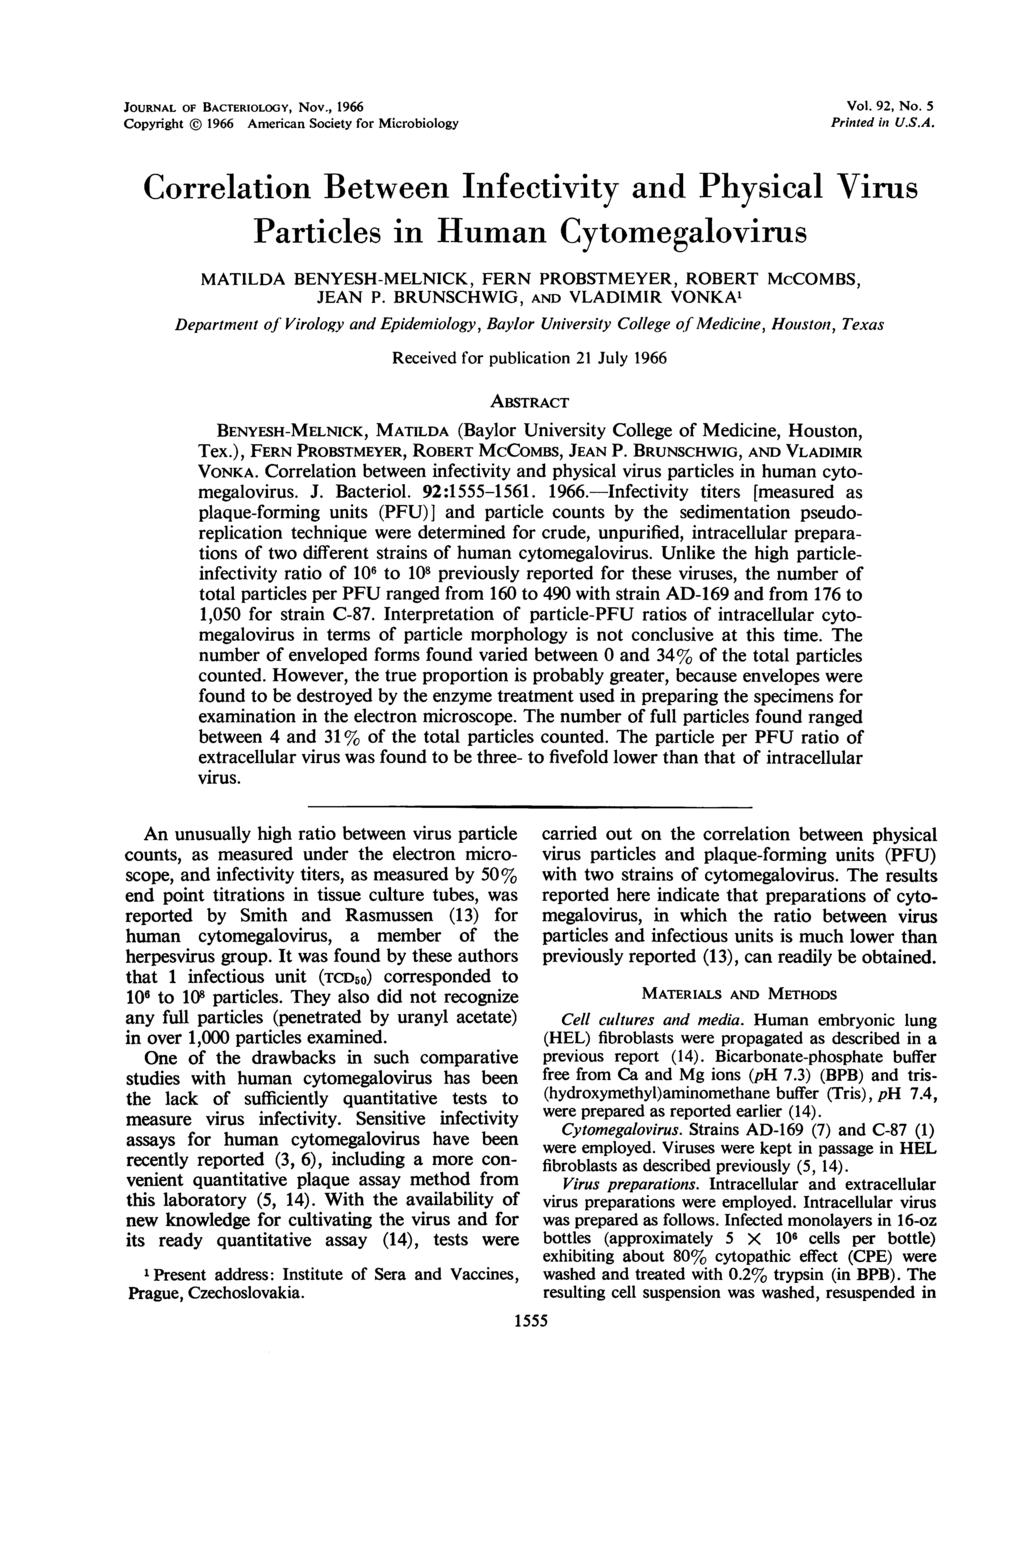 JOURNAL OF BACTERIOLOGY, Nov., 66 Copyright 66 American Society for Microbiology Vol., No. 5 Printed in U.S.A. Correlation Between Infectivity and Physical Virus Particles in Human Cytomegalovirus MATILDA BENYESH-MELNICK, FERN PROBSTMEYER, ROBERT McCOMBS, JEAN P.